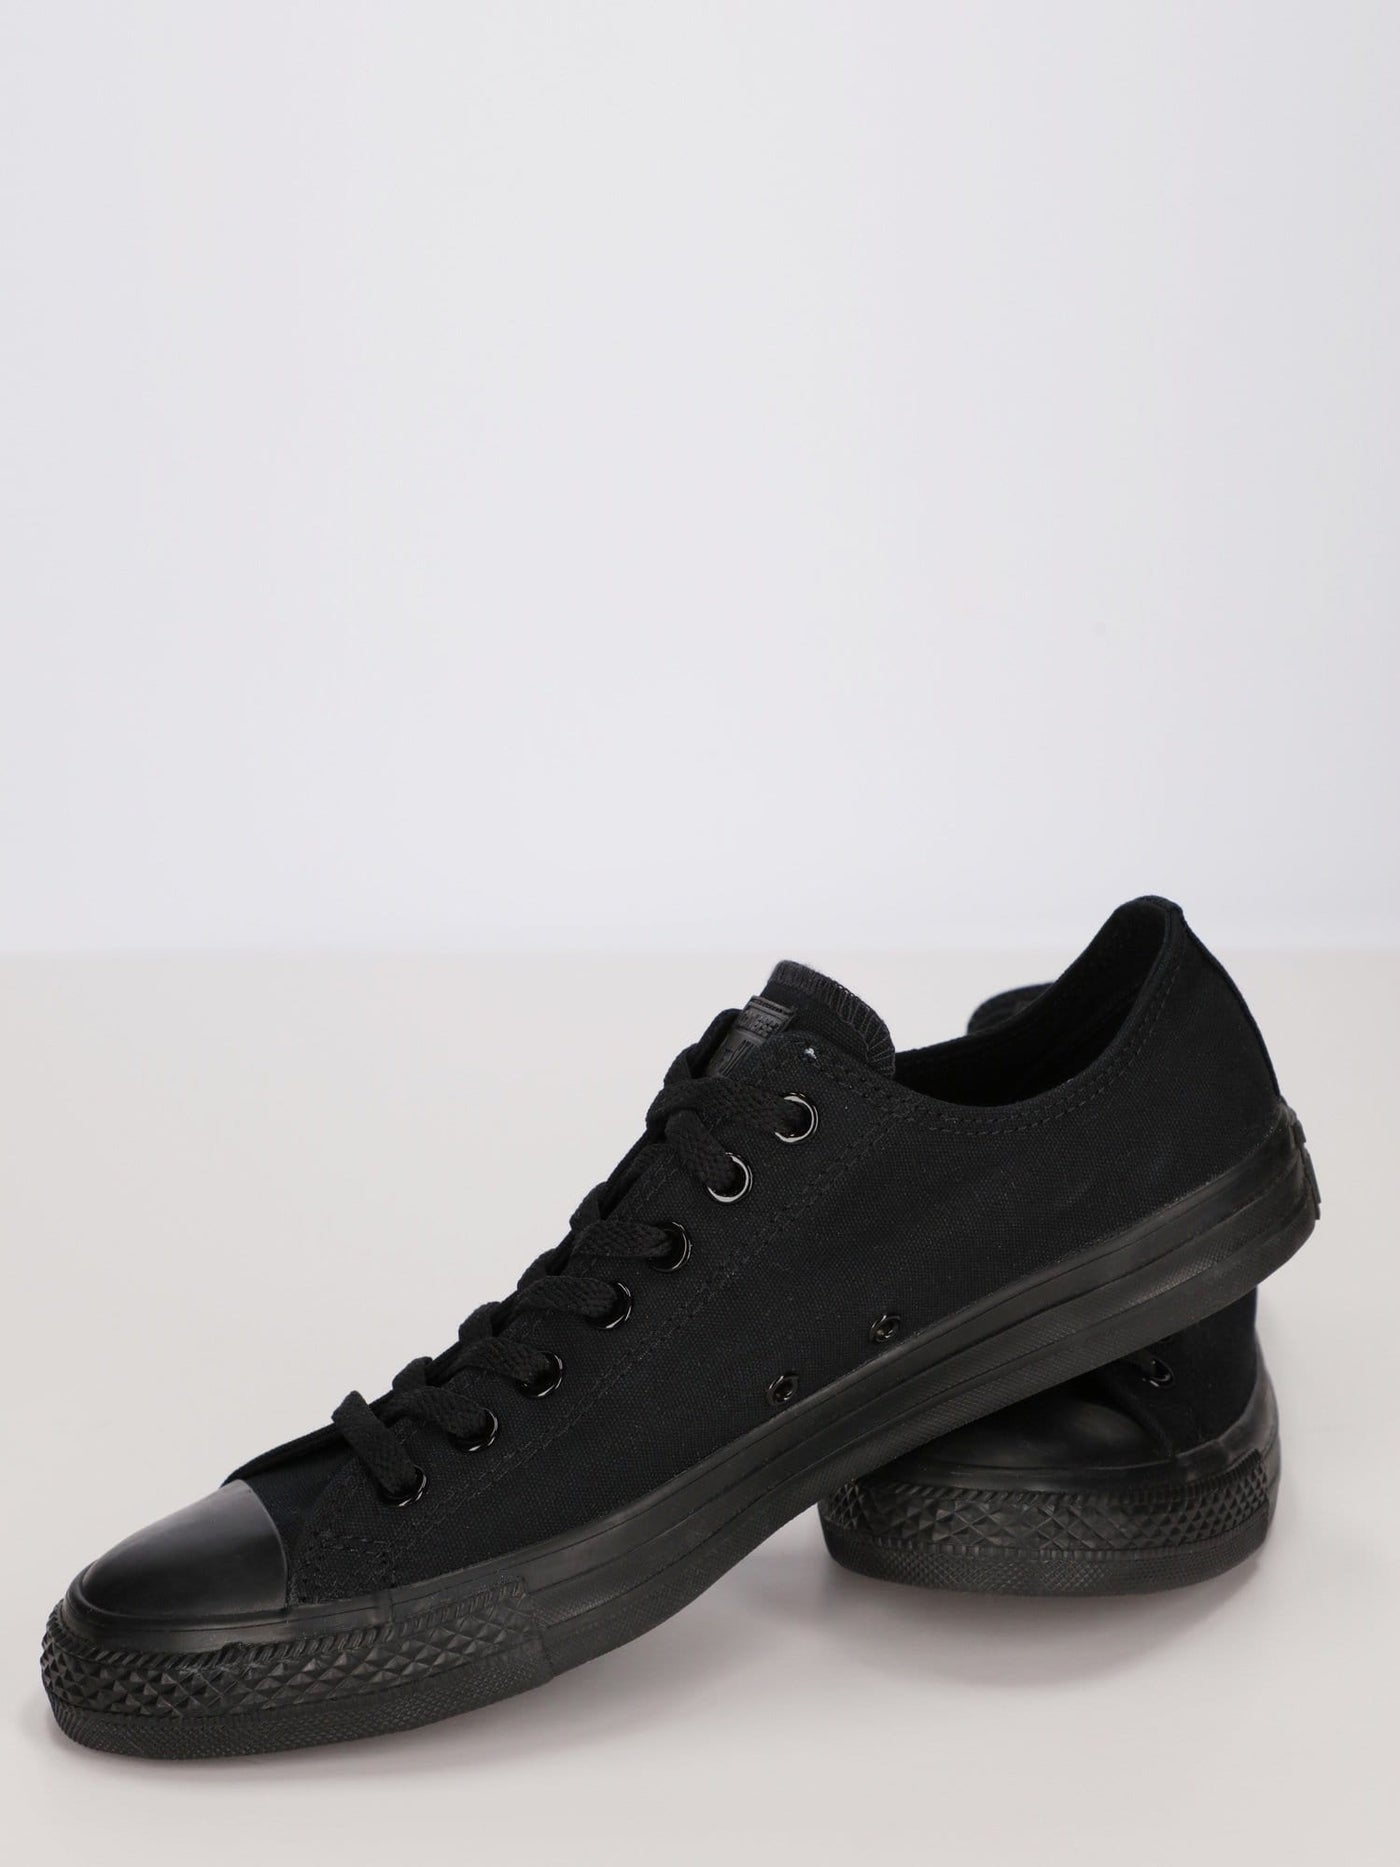 Converse Sneakers Black Monochrome / 39 Chuck Taylor All Star Ox 'All Black' Unisex Sneakers